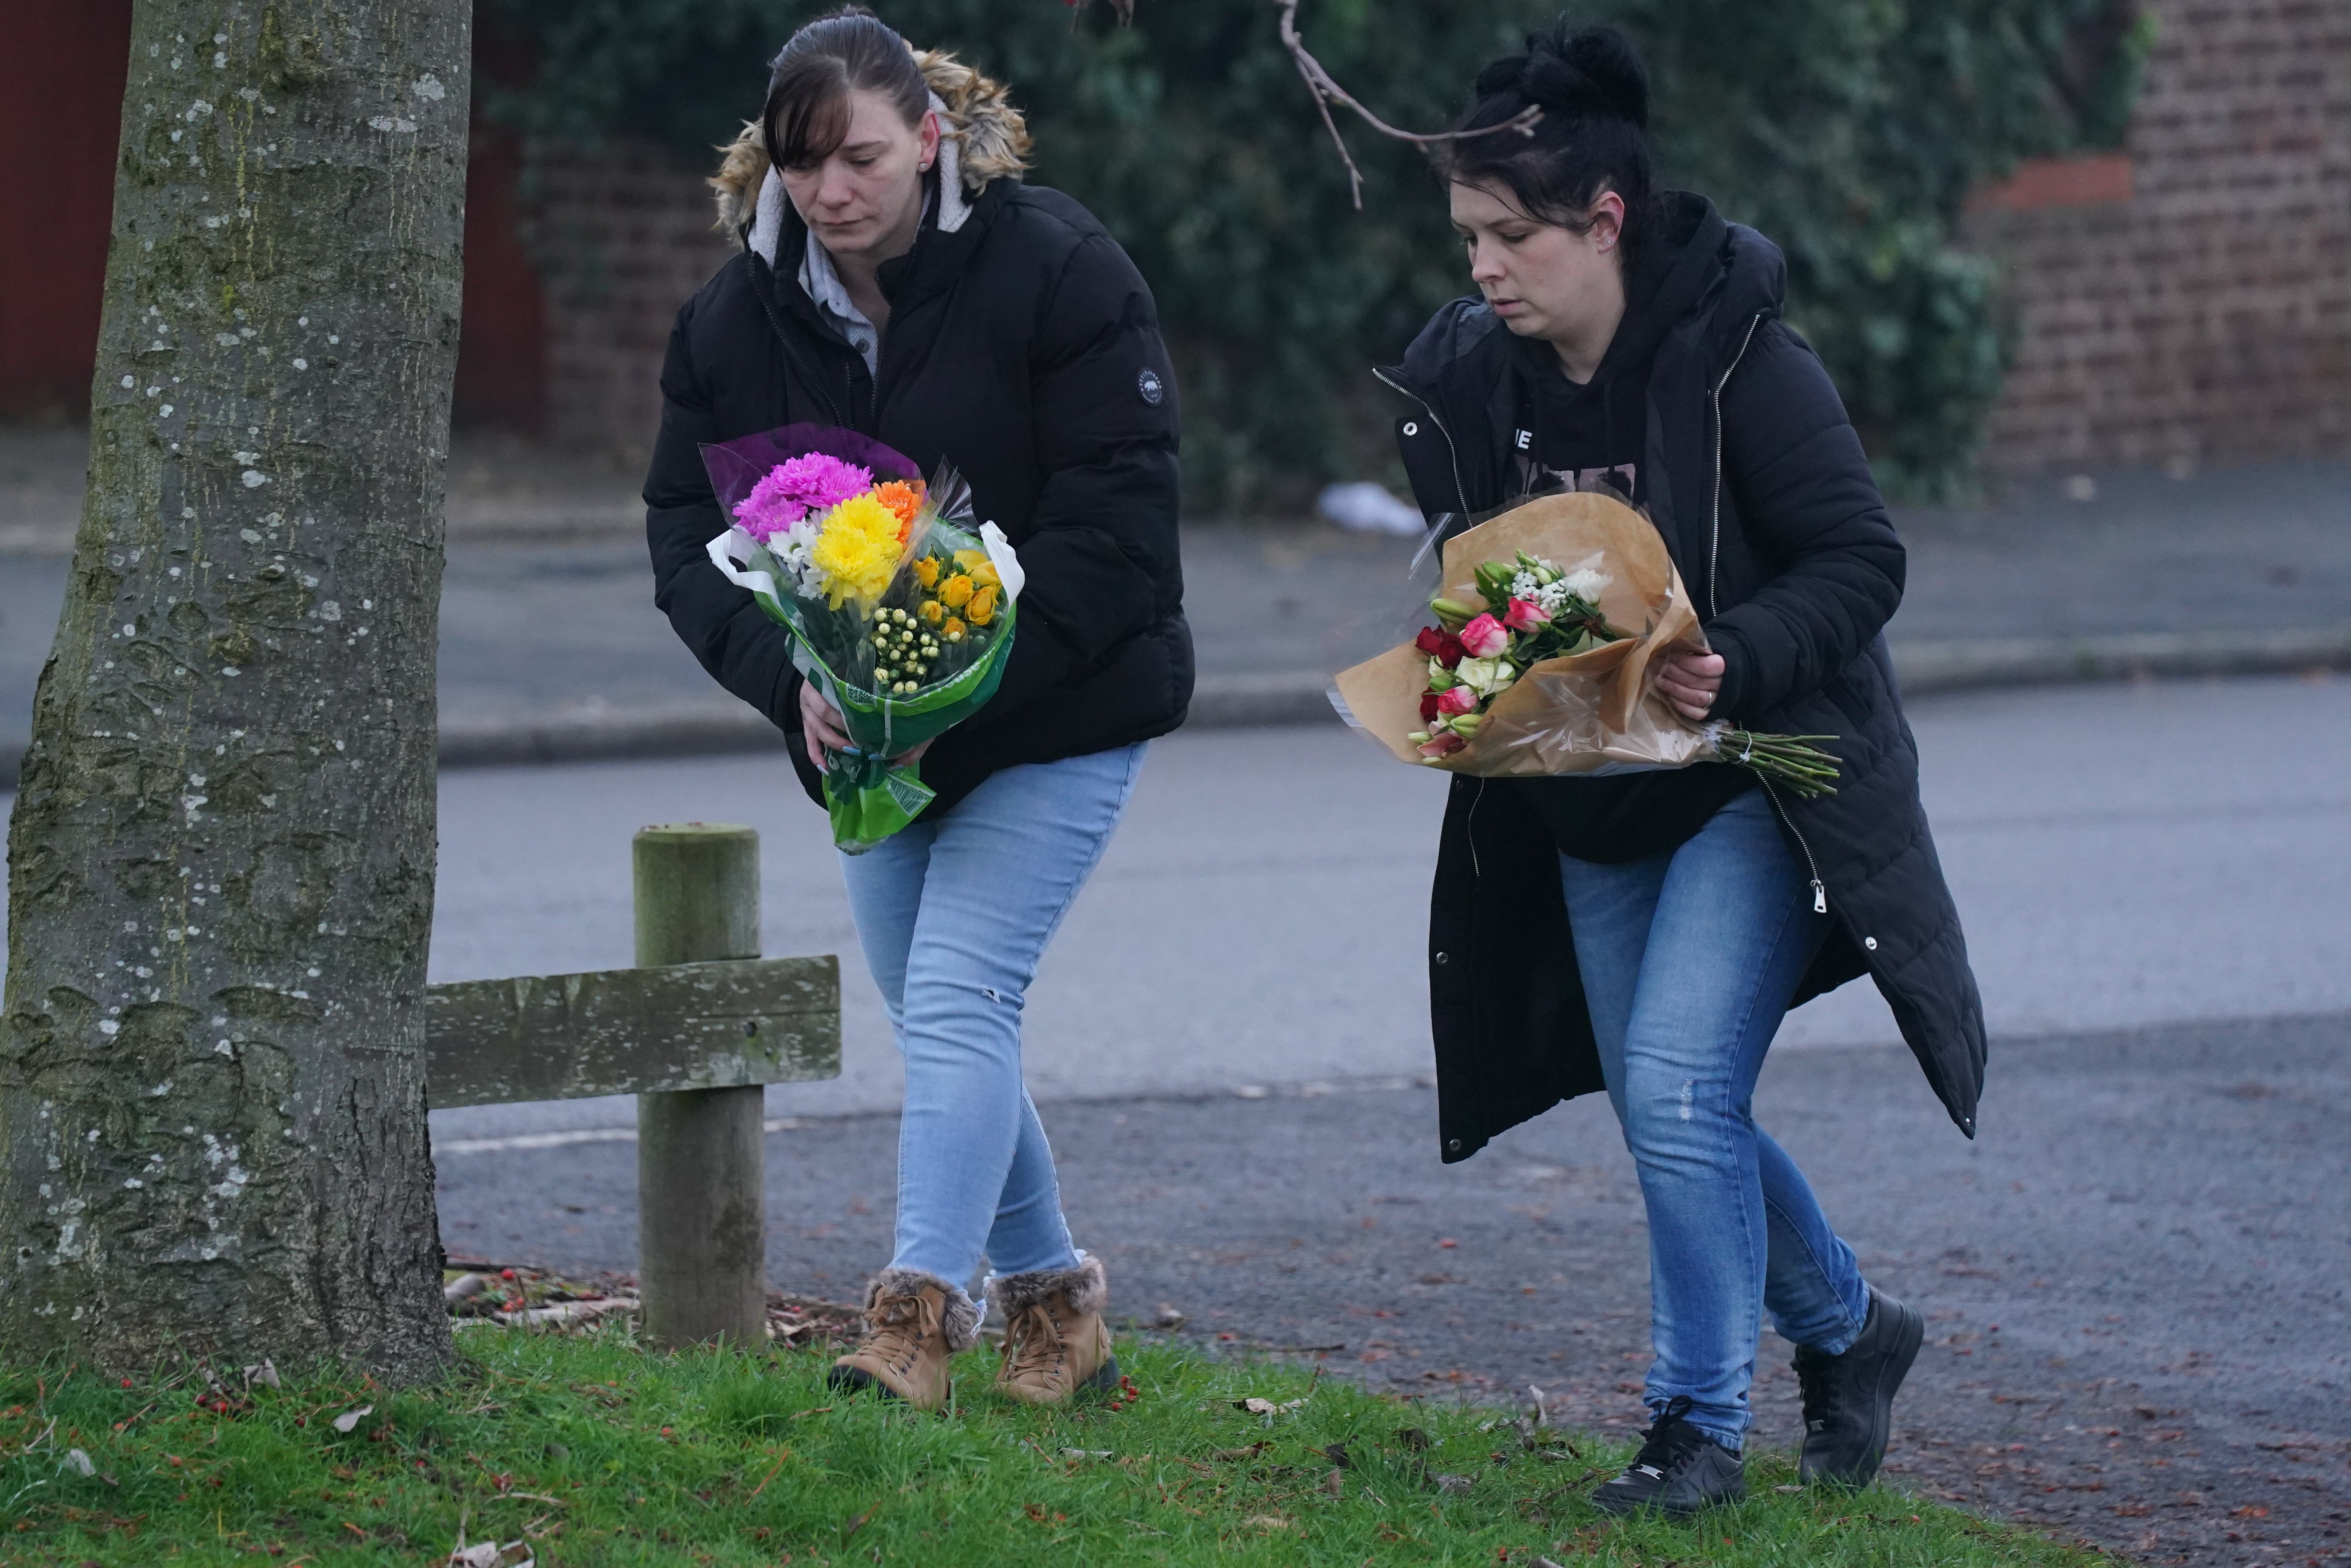 Local residents have paid tribute to the boys who died in the incident